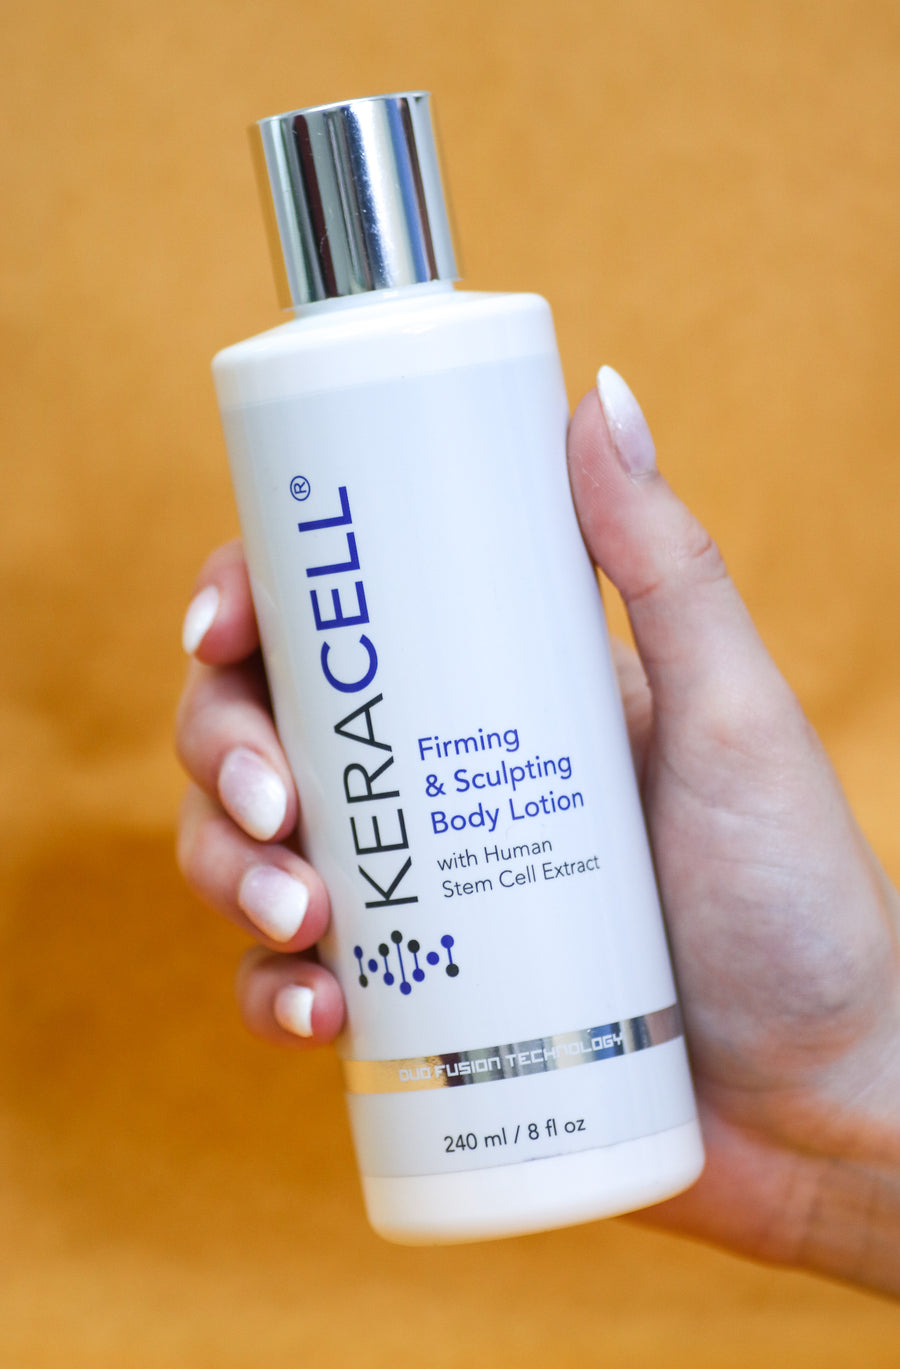 Keracell firming and sculpting body lotion